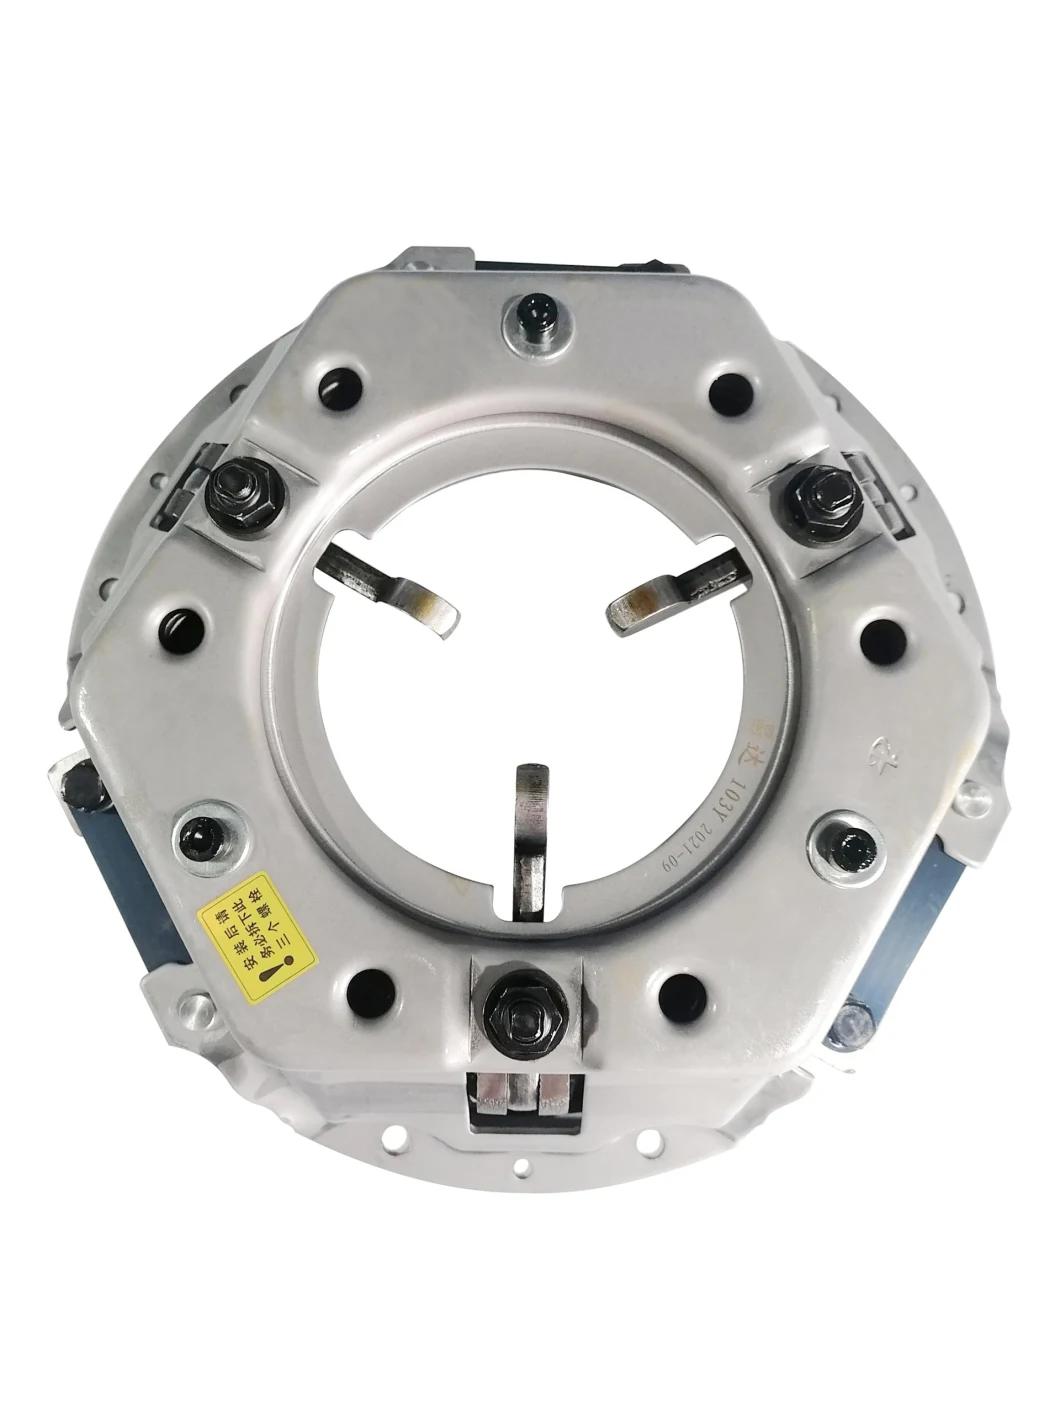 Original China Factory Clutch Plate for Heli 3t 3 Claws